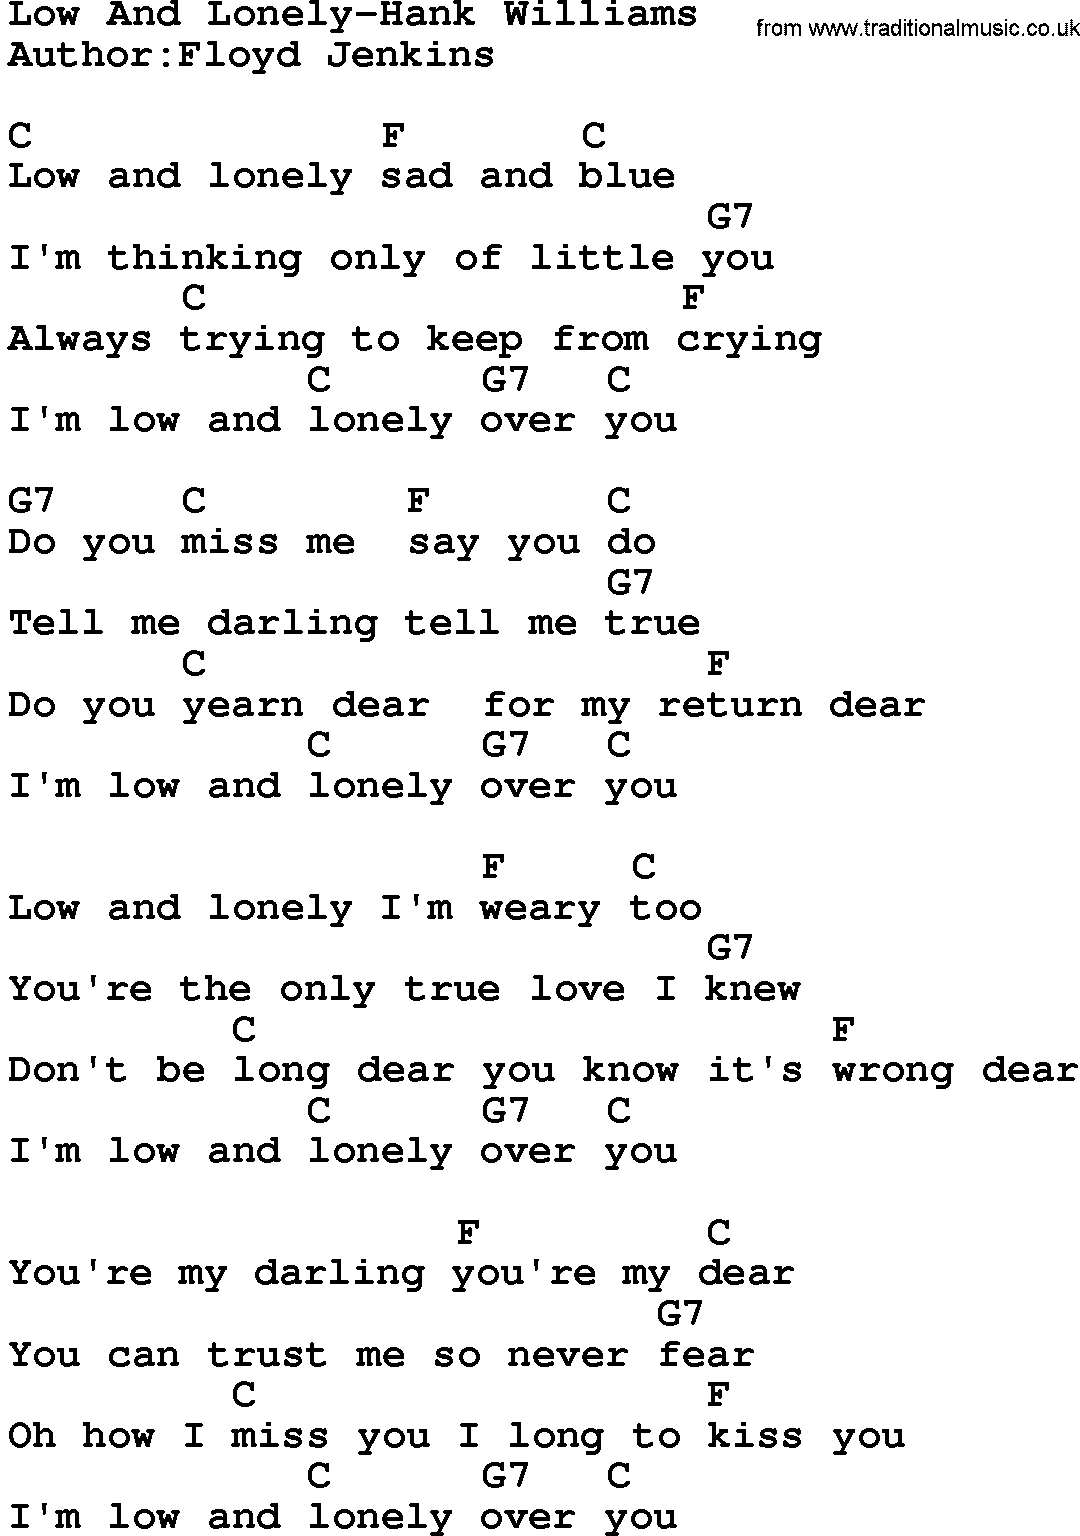 Country music song: Low And Lonely-Hank Williams lyrics and chords